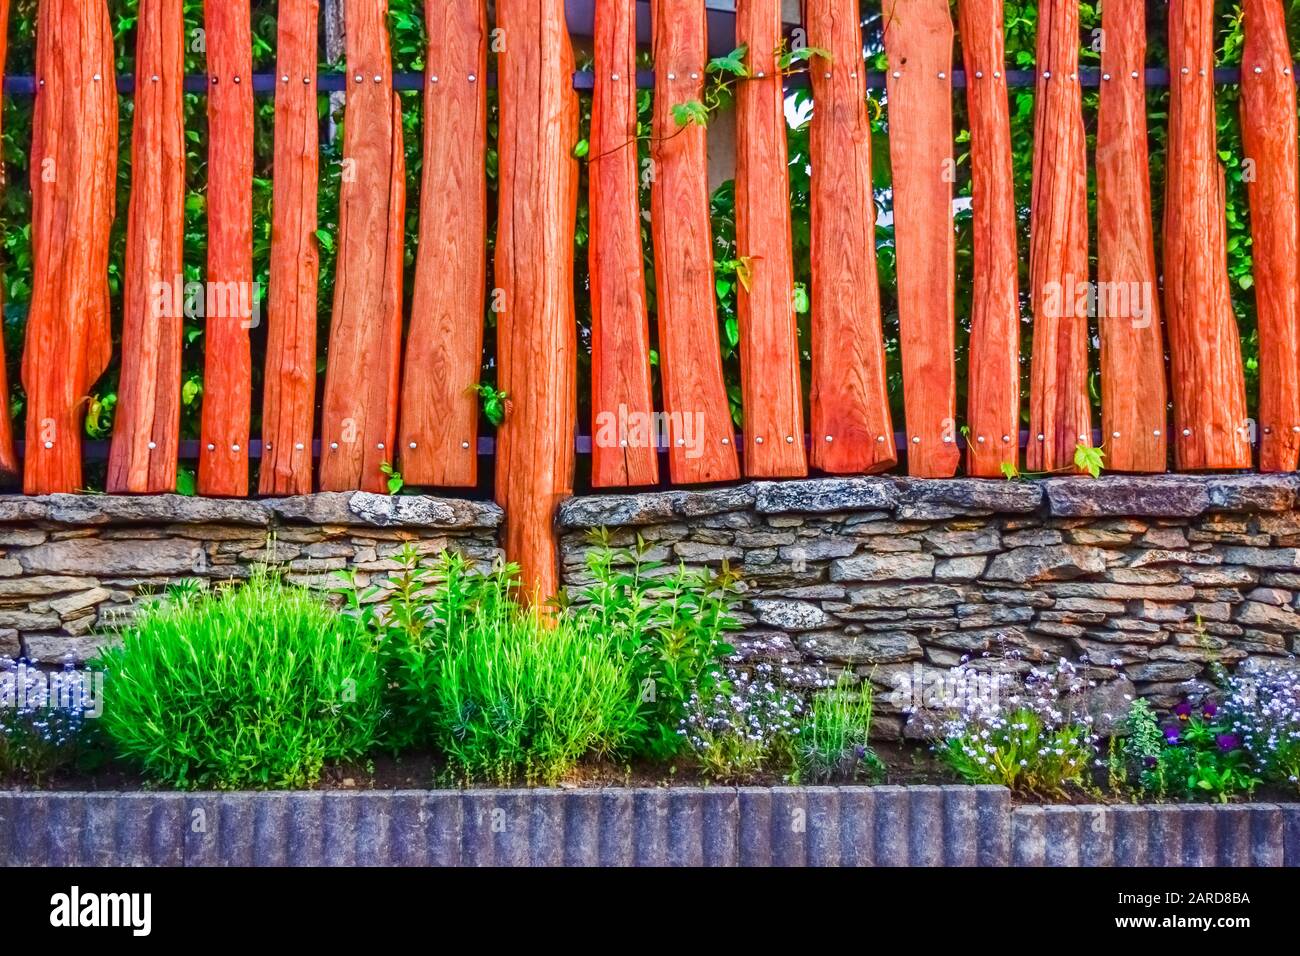 beautiful garden in front of the wooden fence Stock Photo